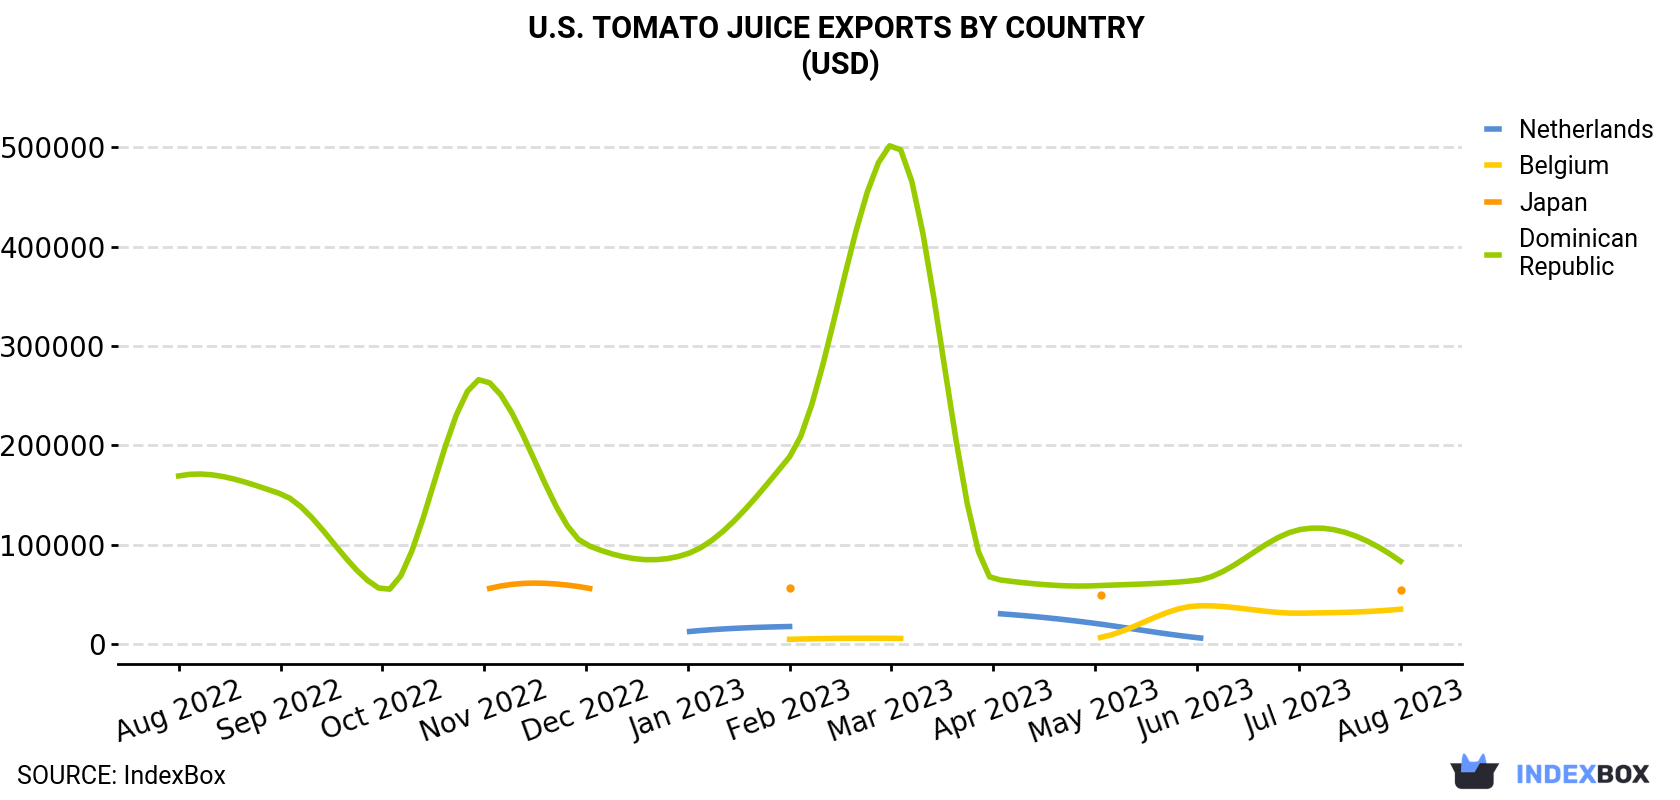 U.S. Tomato Juice Exports By Country (USD)